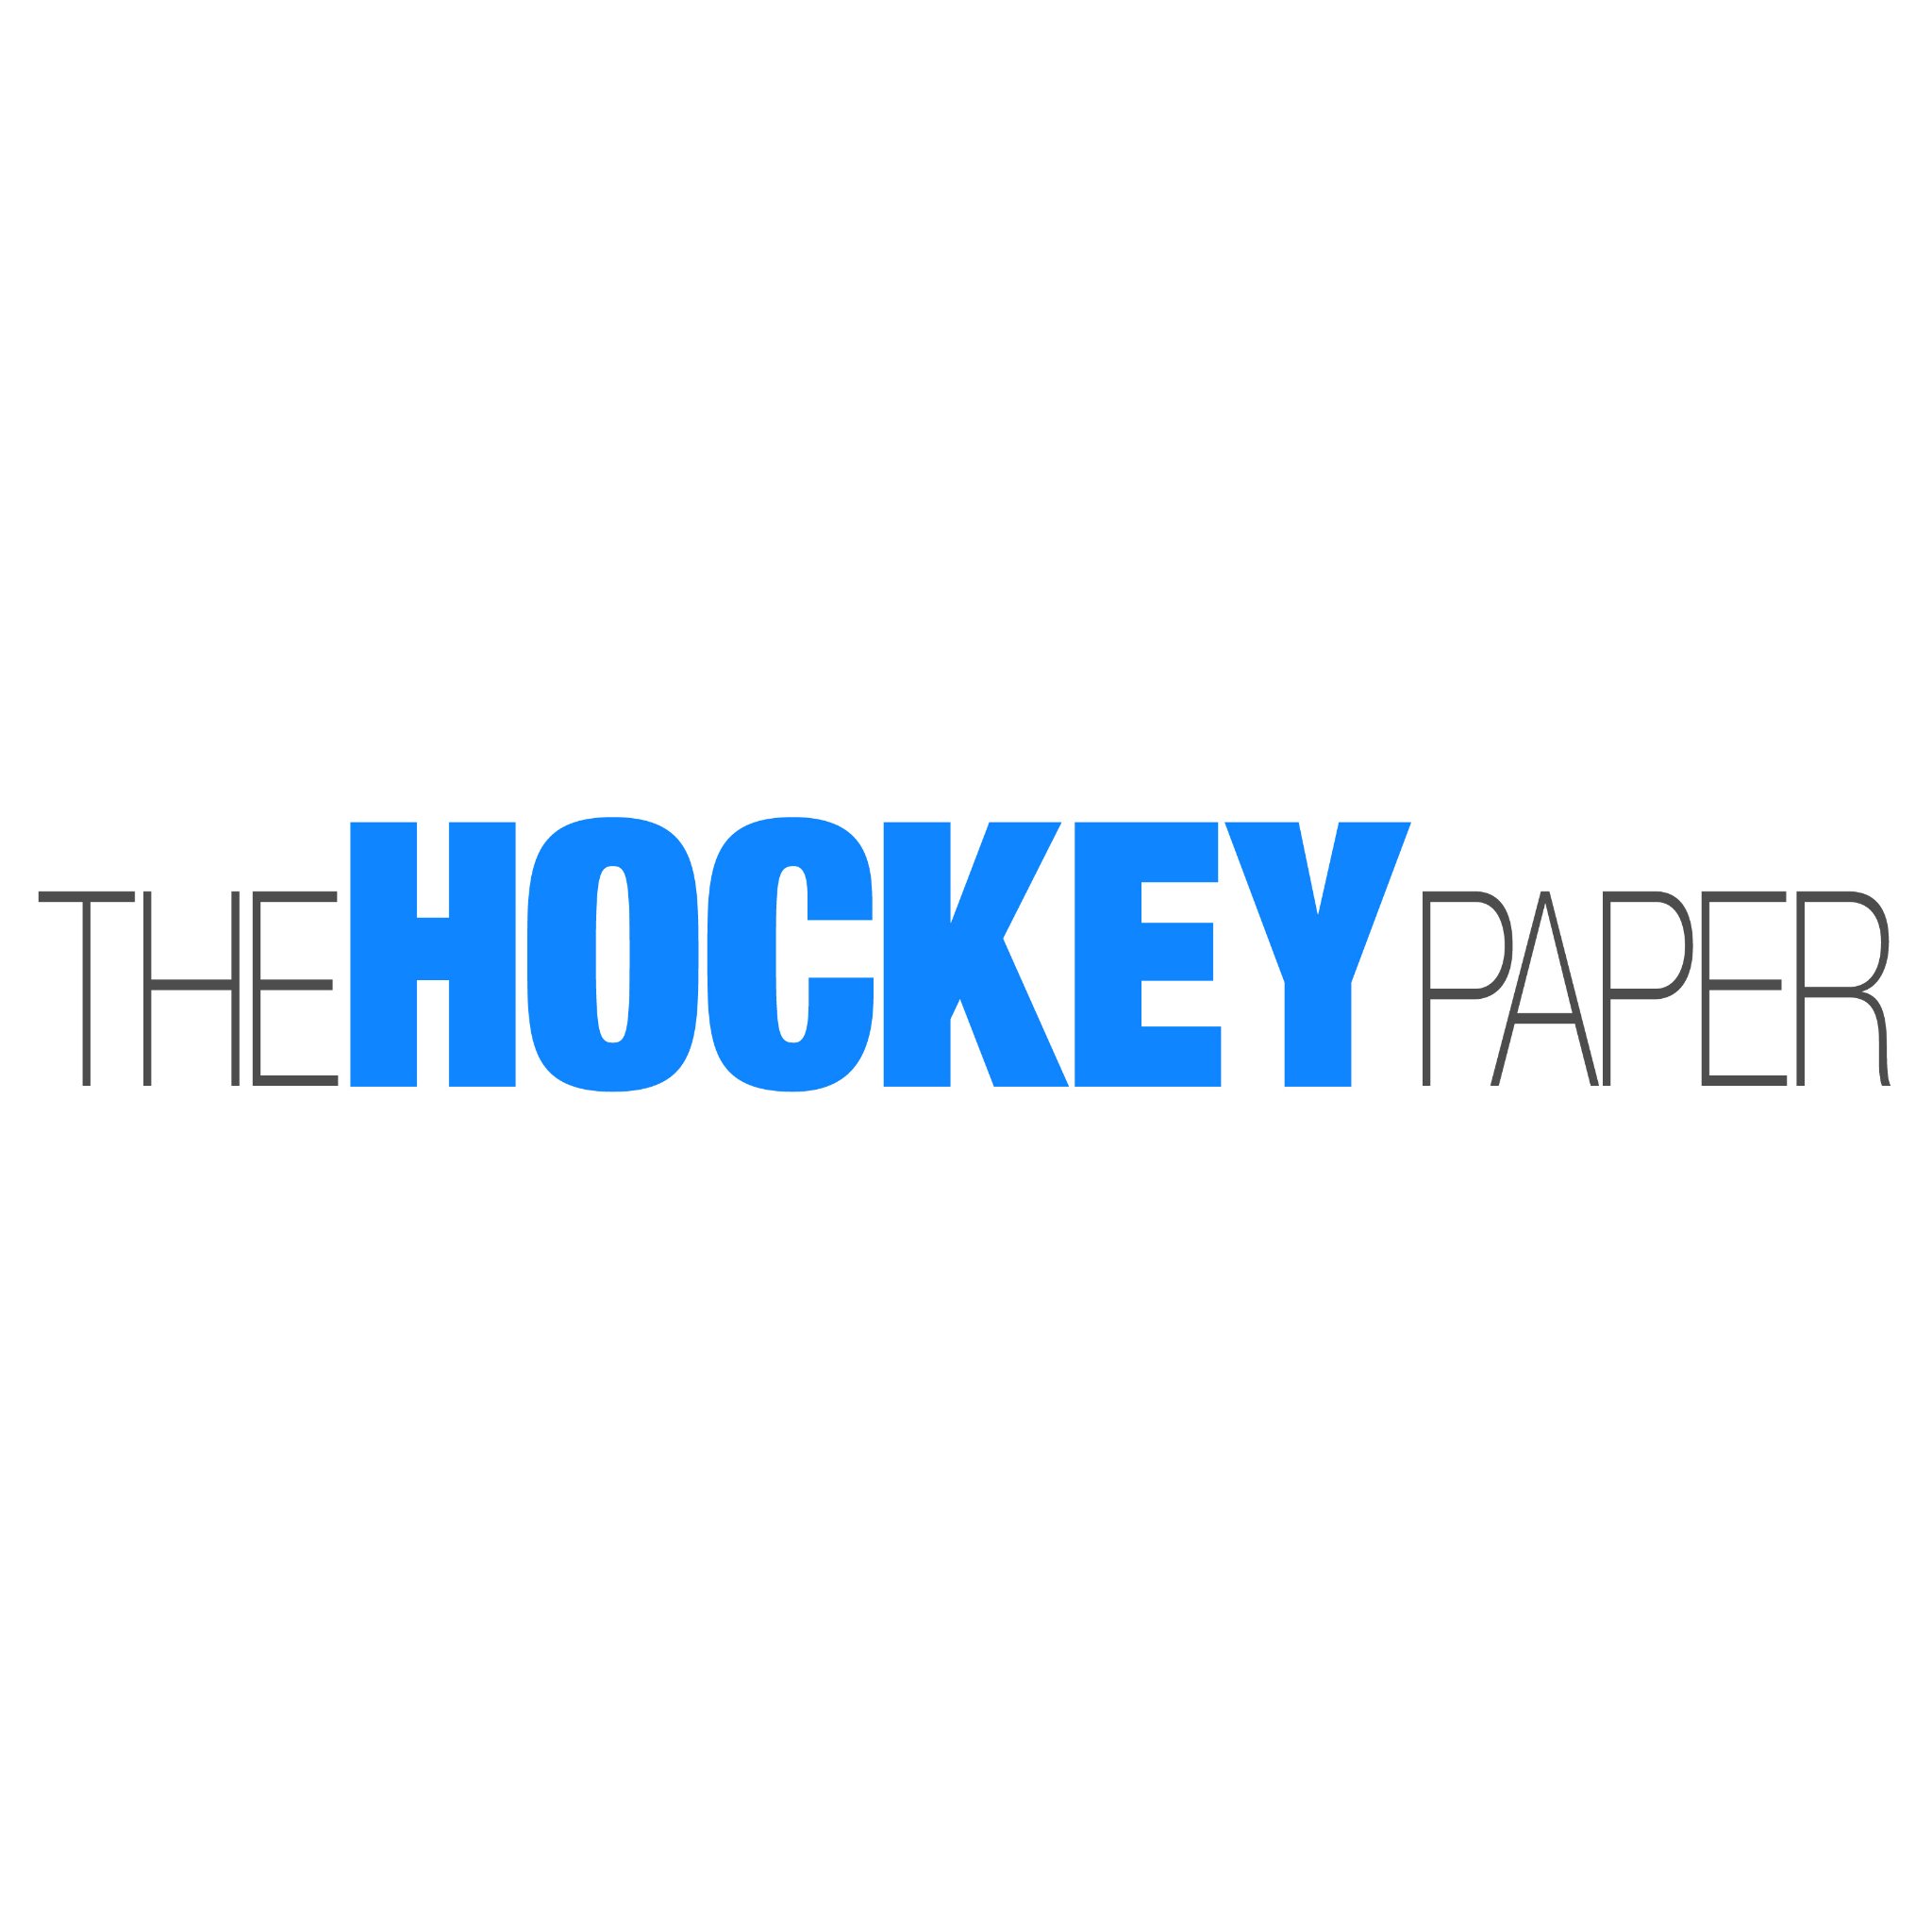 This is our old account - please follow @TheHockeyPaper